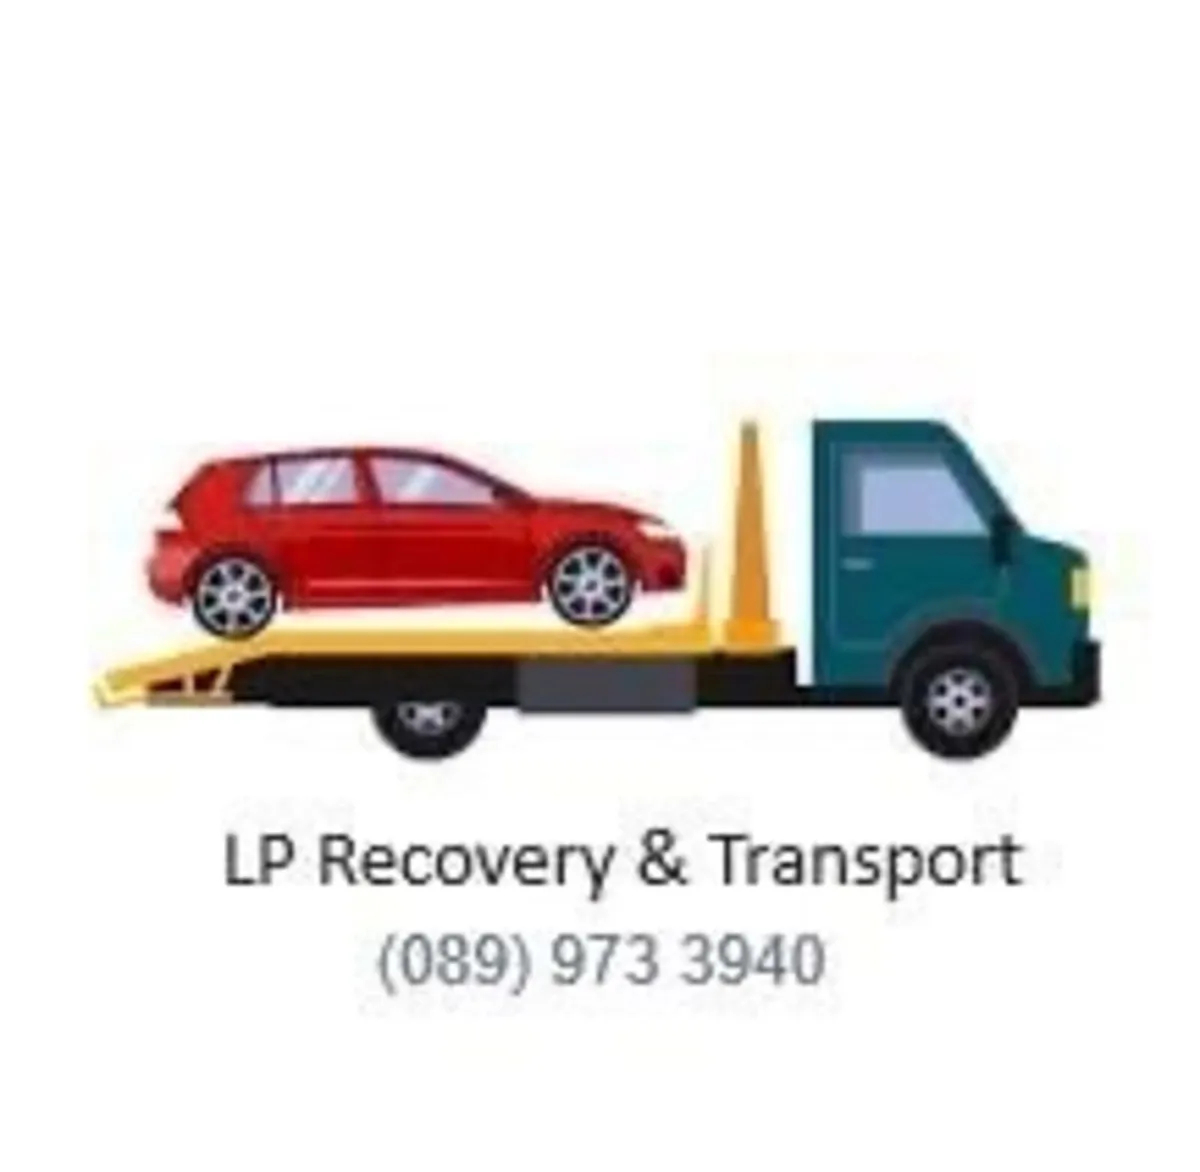 Recovery service & transport - Image 1